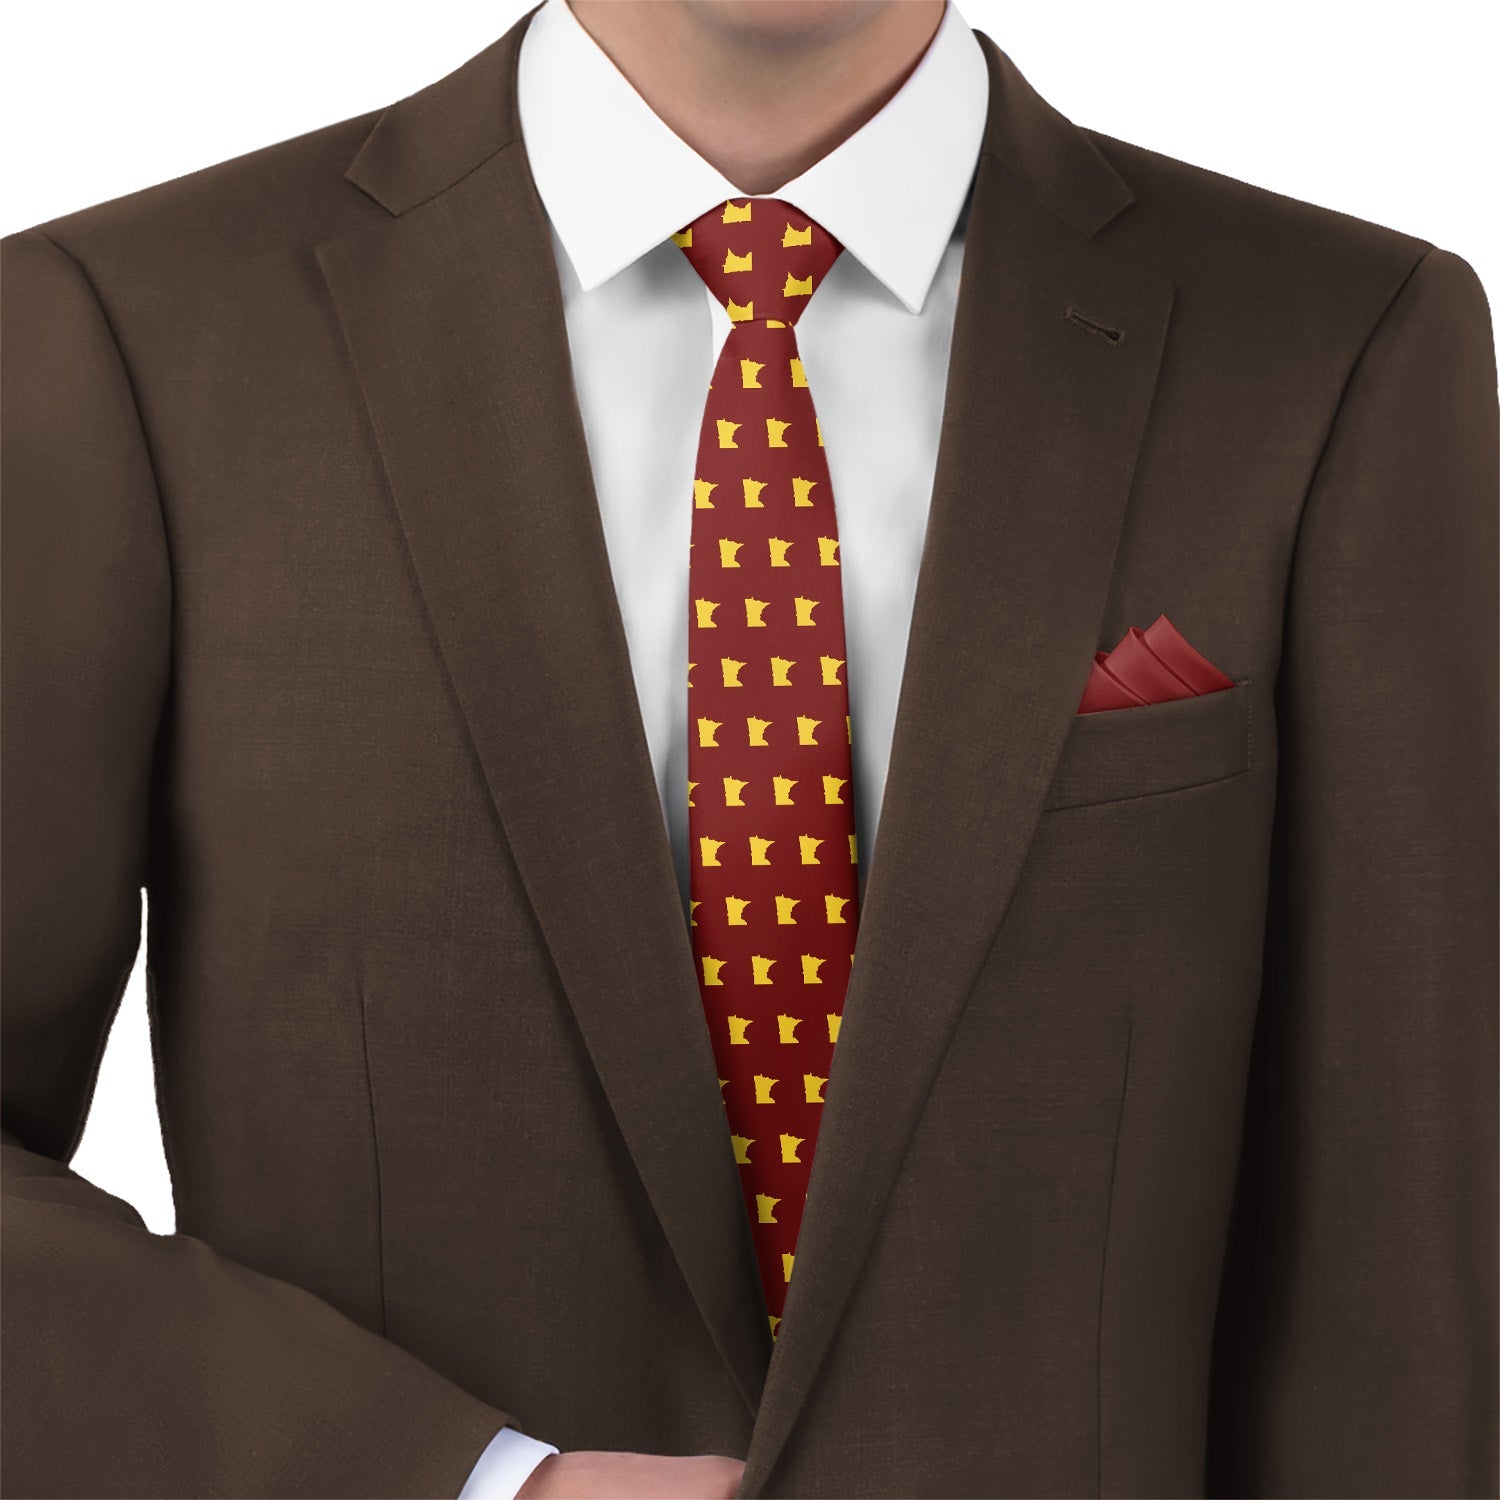 Minnesota State Outline Necktie - Matching Pocket Square - Knotty Tie Co.